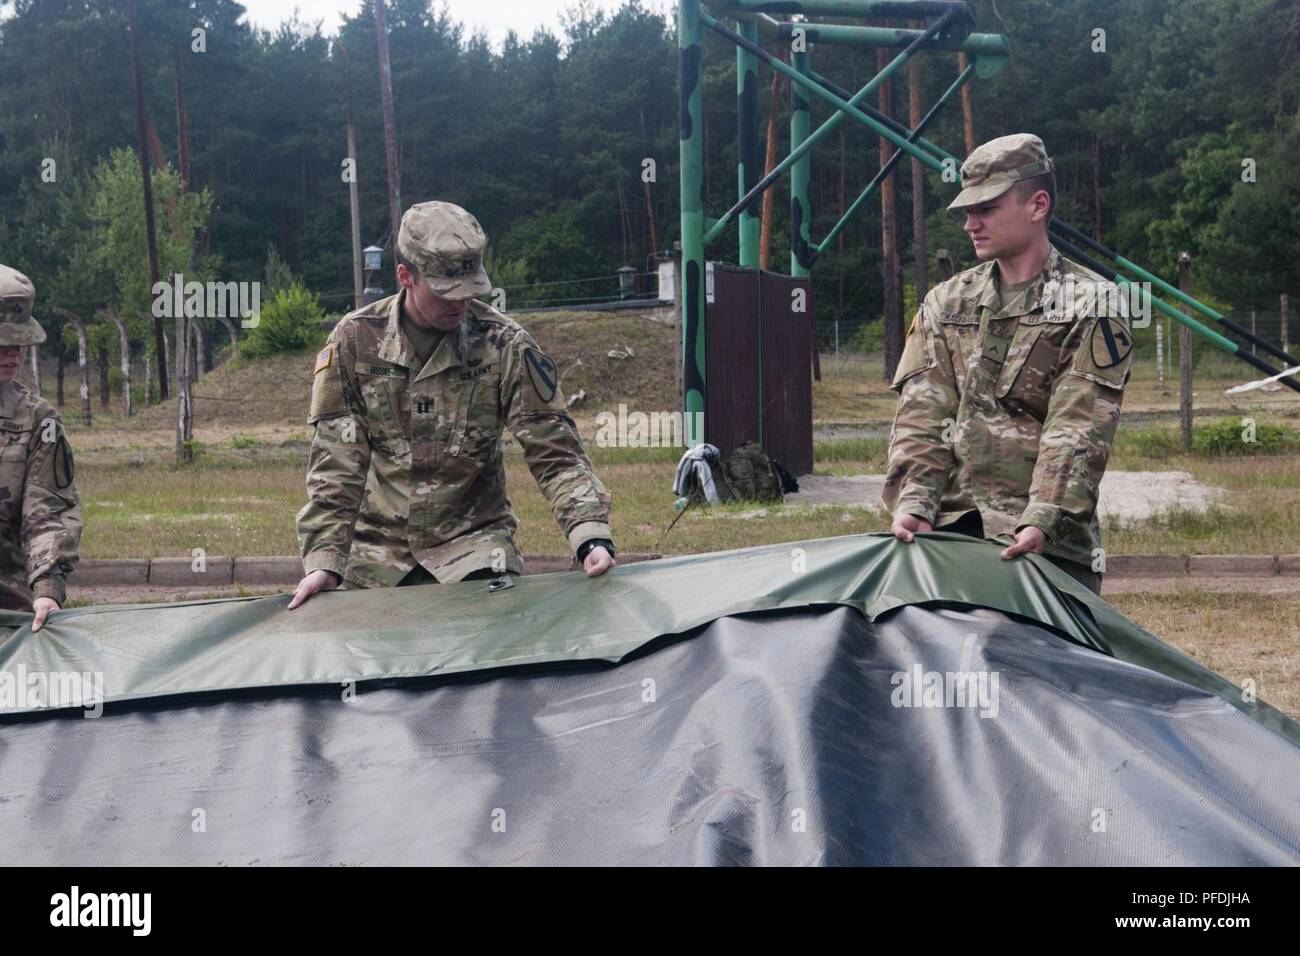 Army Cpl. Ethan Macfarlane, the military intelligence section noncomissioned officer in charge assigned to Headquarters and Headquarters Company, 1st Armored Brigade Combat Team, 1st Cavalry Division, directs Soldiers during the disassembly of the tactical operations center tent during a training exercise in Zagan, Poland, June 12, 2018. Macfarlane is currently deployed in support of Atlantic Resolve in Europe. Stock Photo